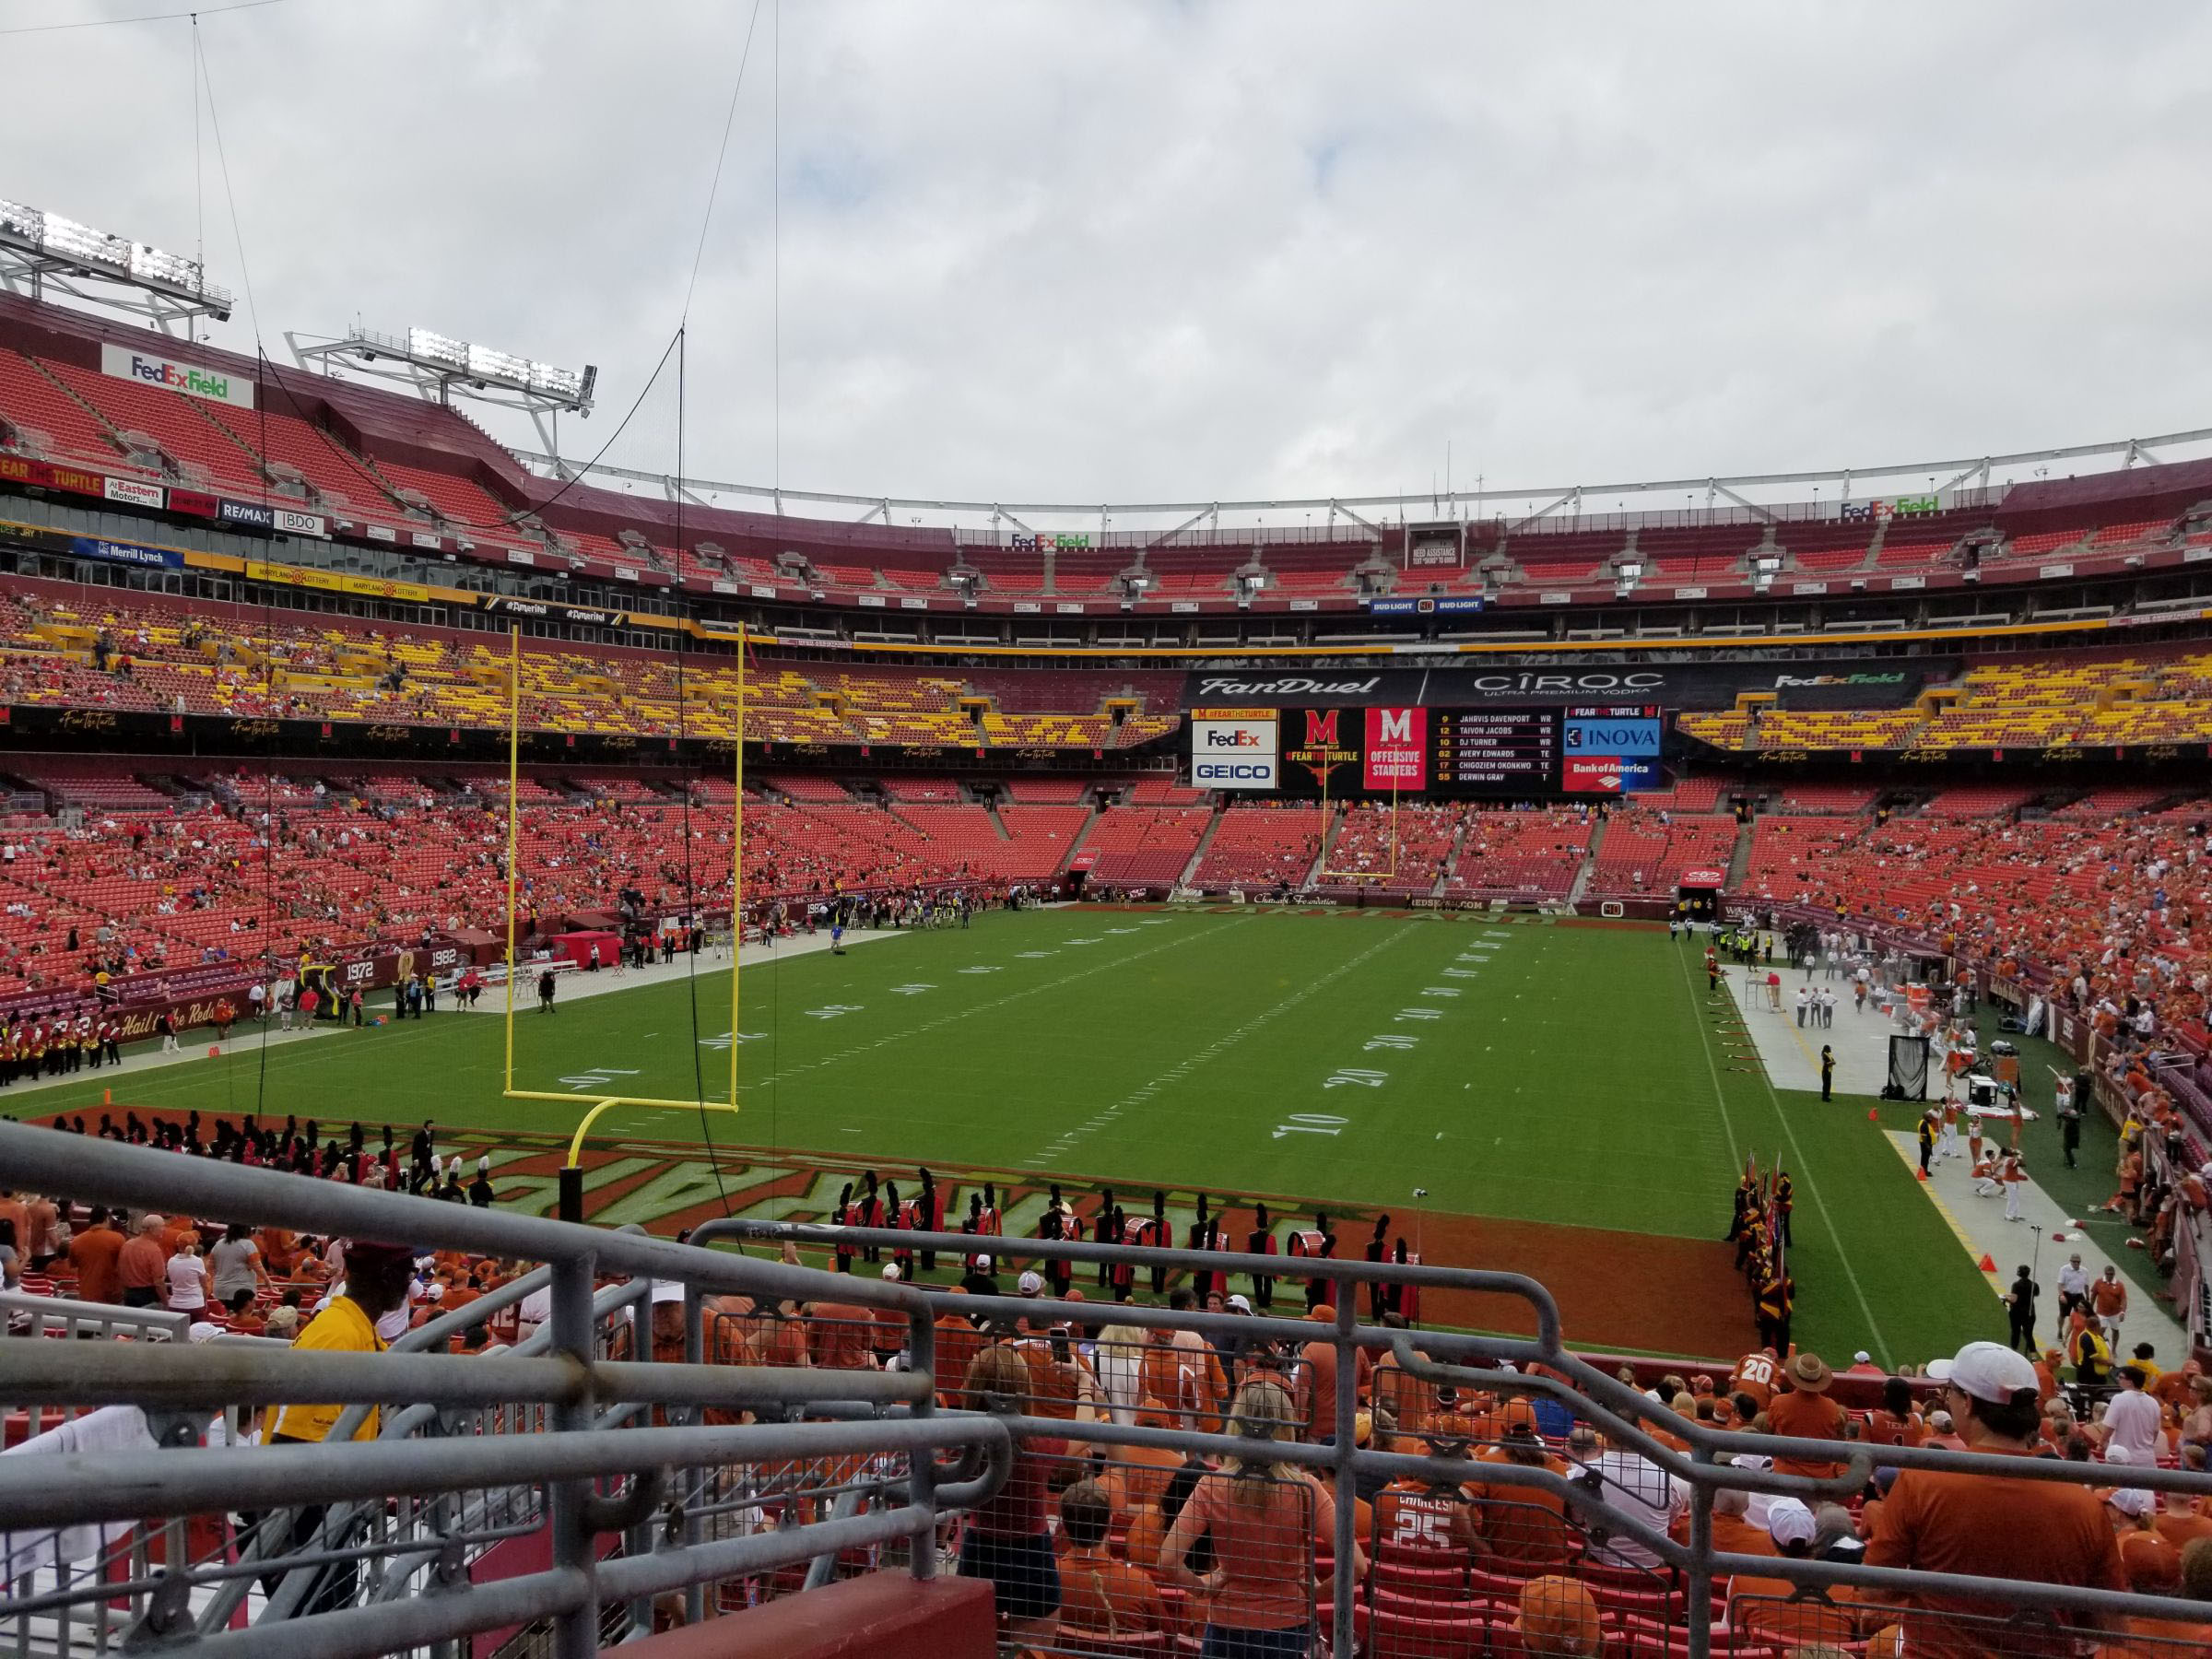 section 230, row 5 seat view  - fedexfield